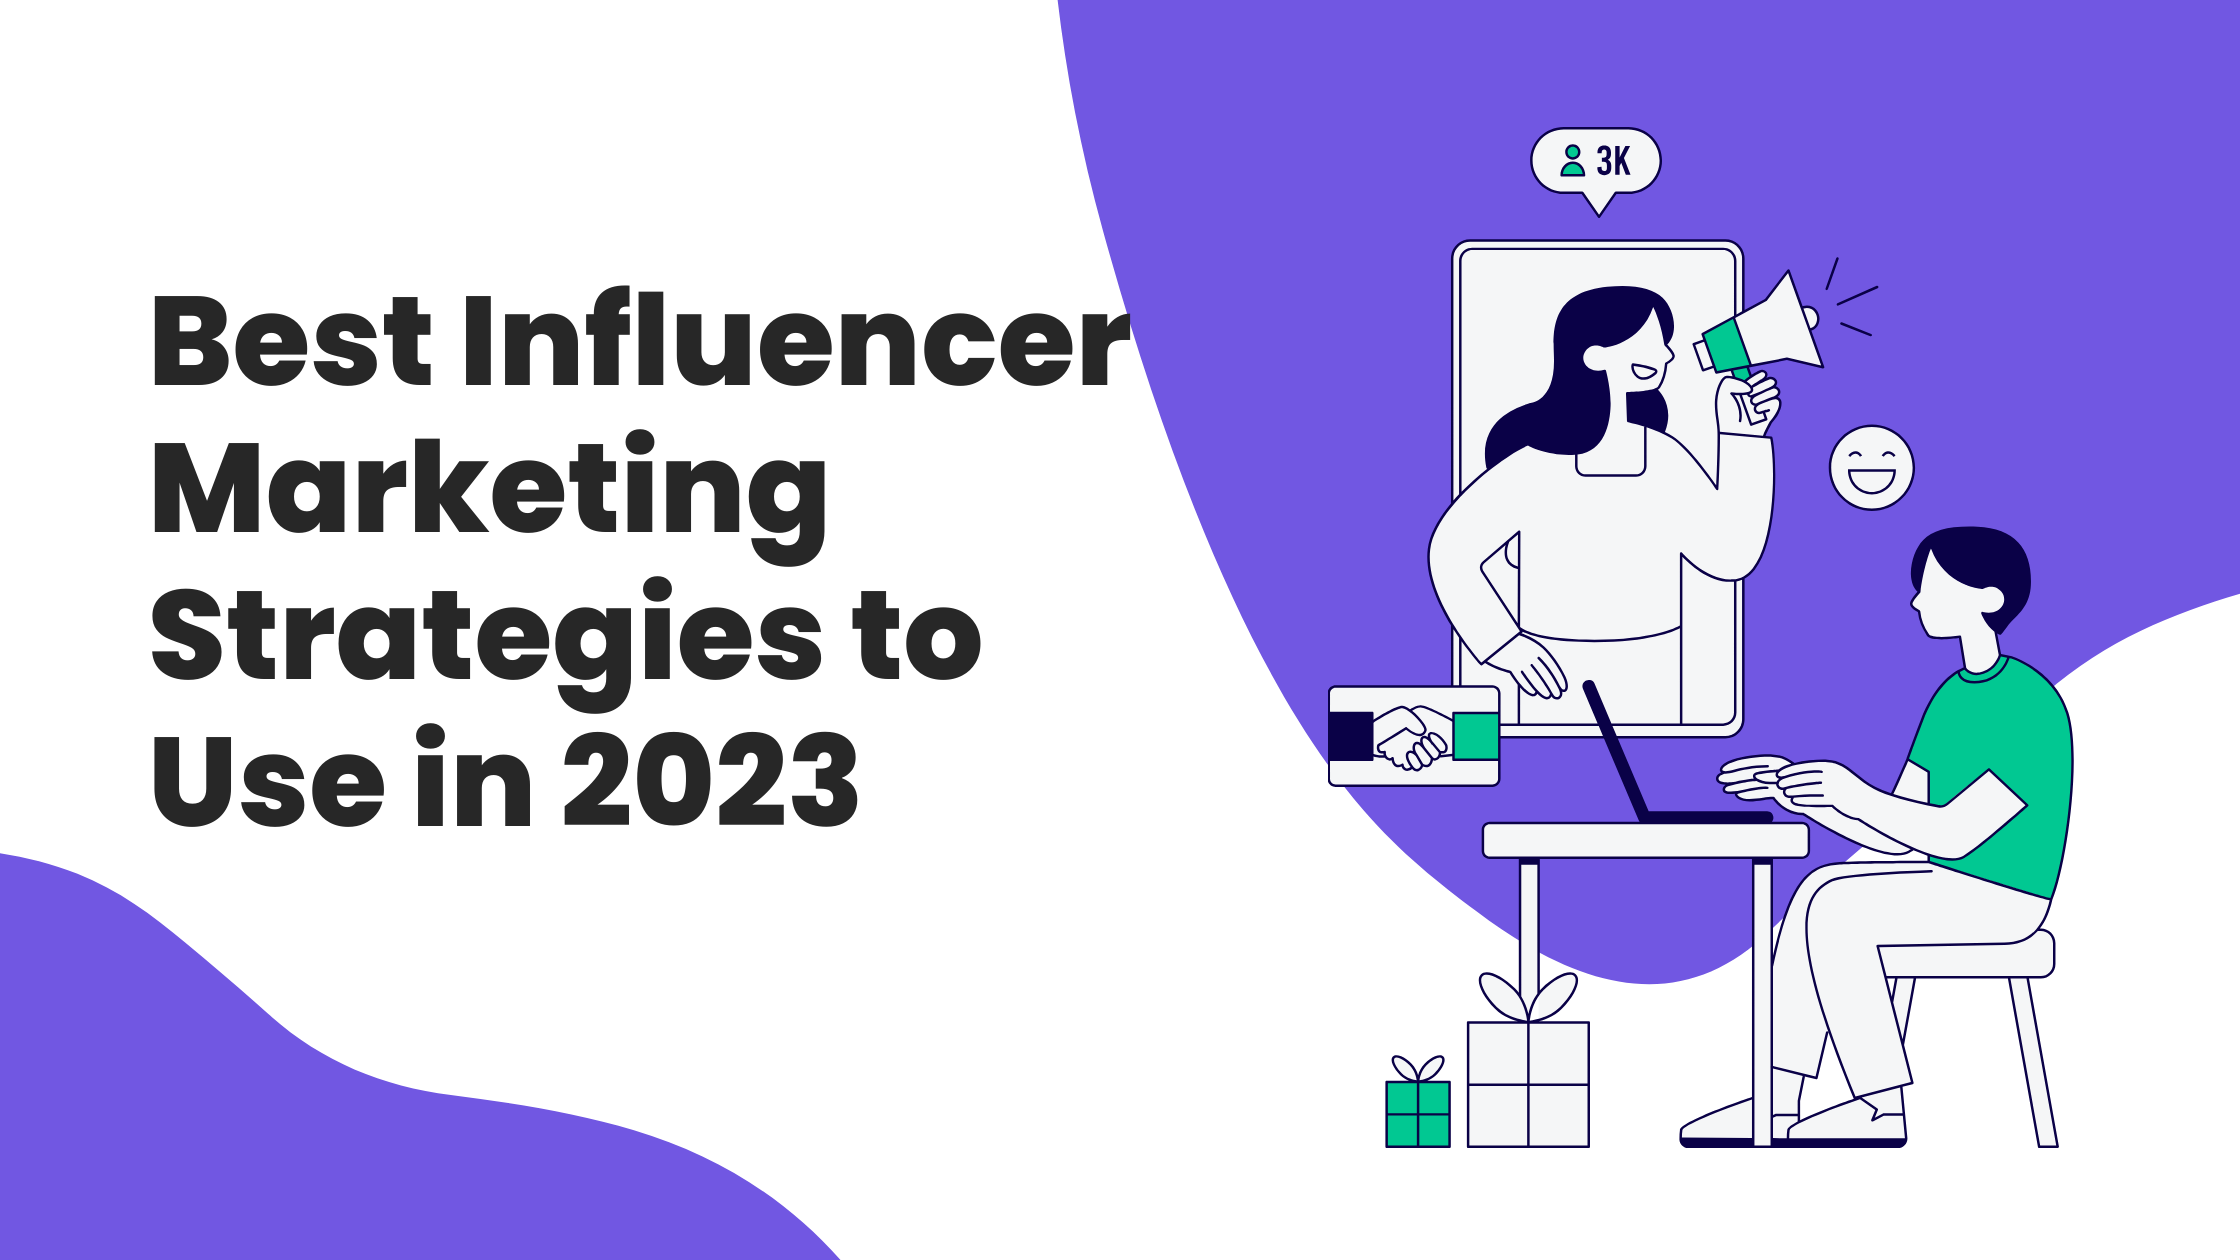 Best Influencer Marketing Strategies to Use in 2023